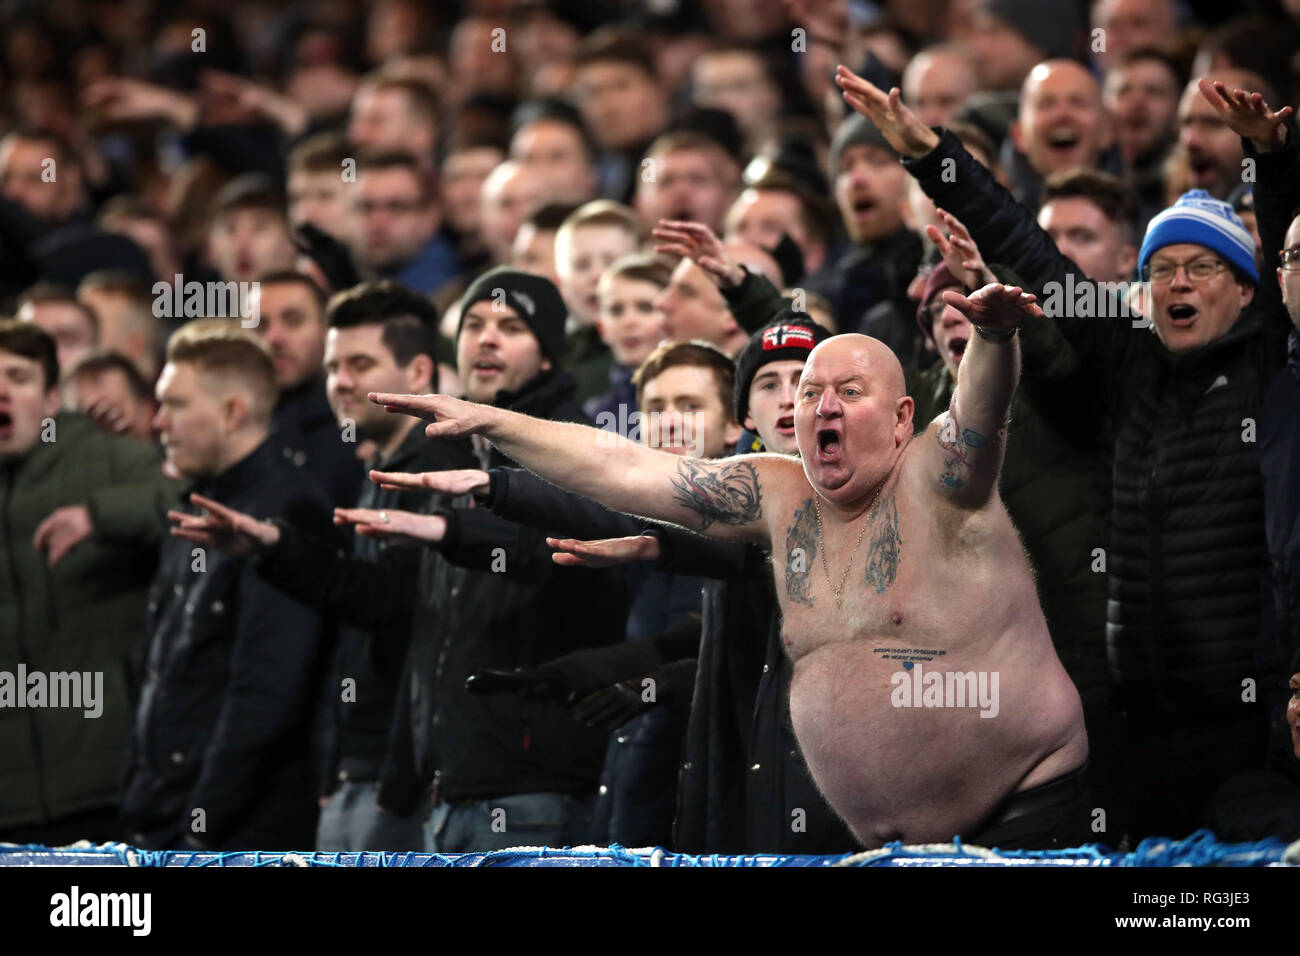 Sheffield Wednesday fan Paul 'Tango' Gregory (second right) in the stands during the FA Cup fourth round match at Stamford Bridge, London. Stock Photo